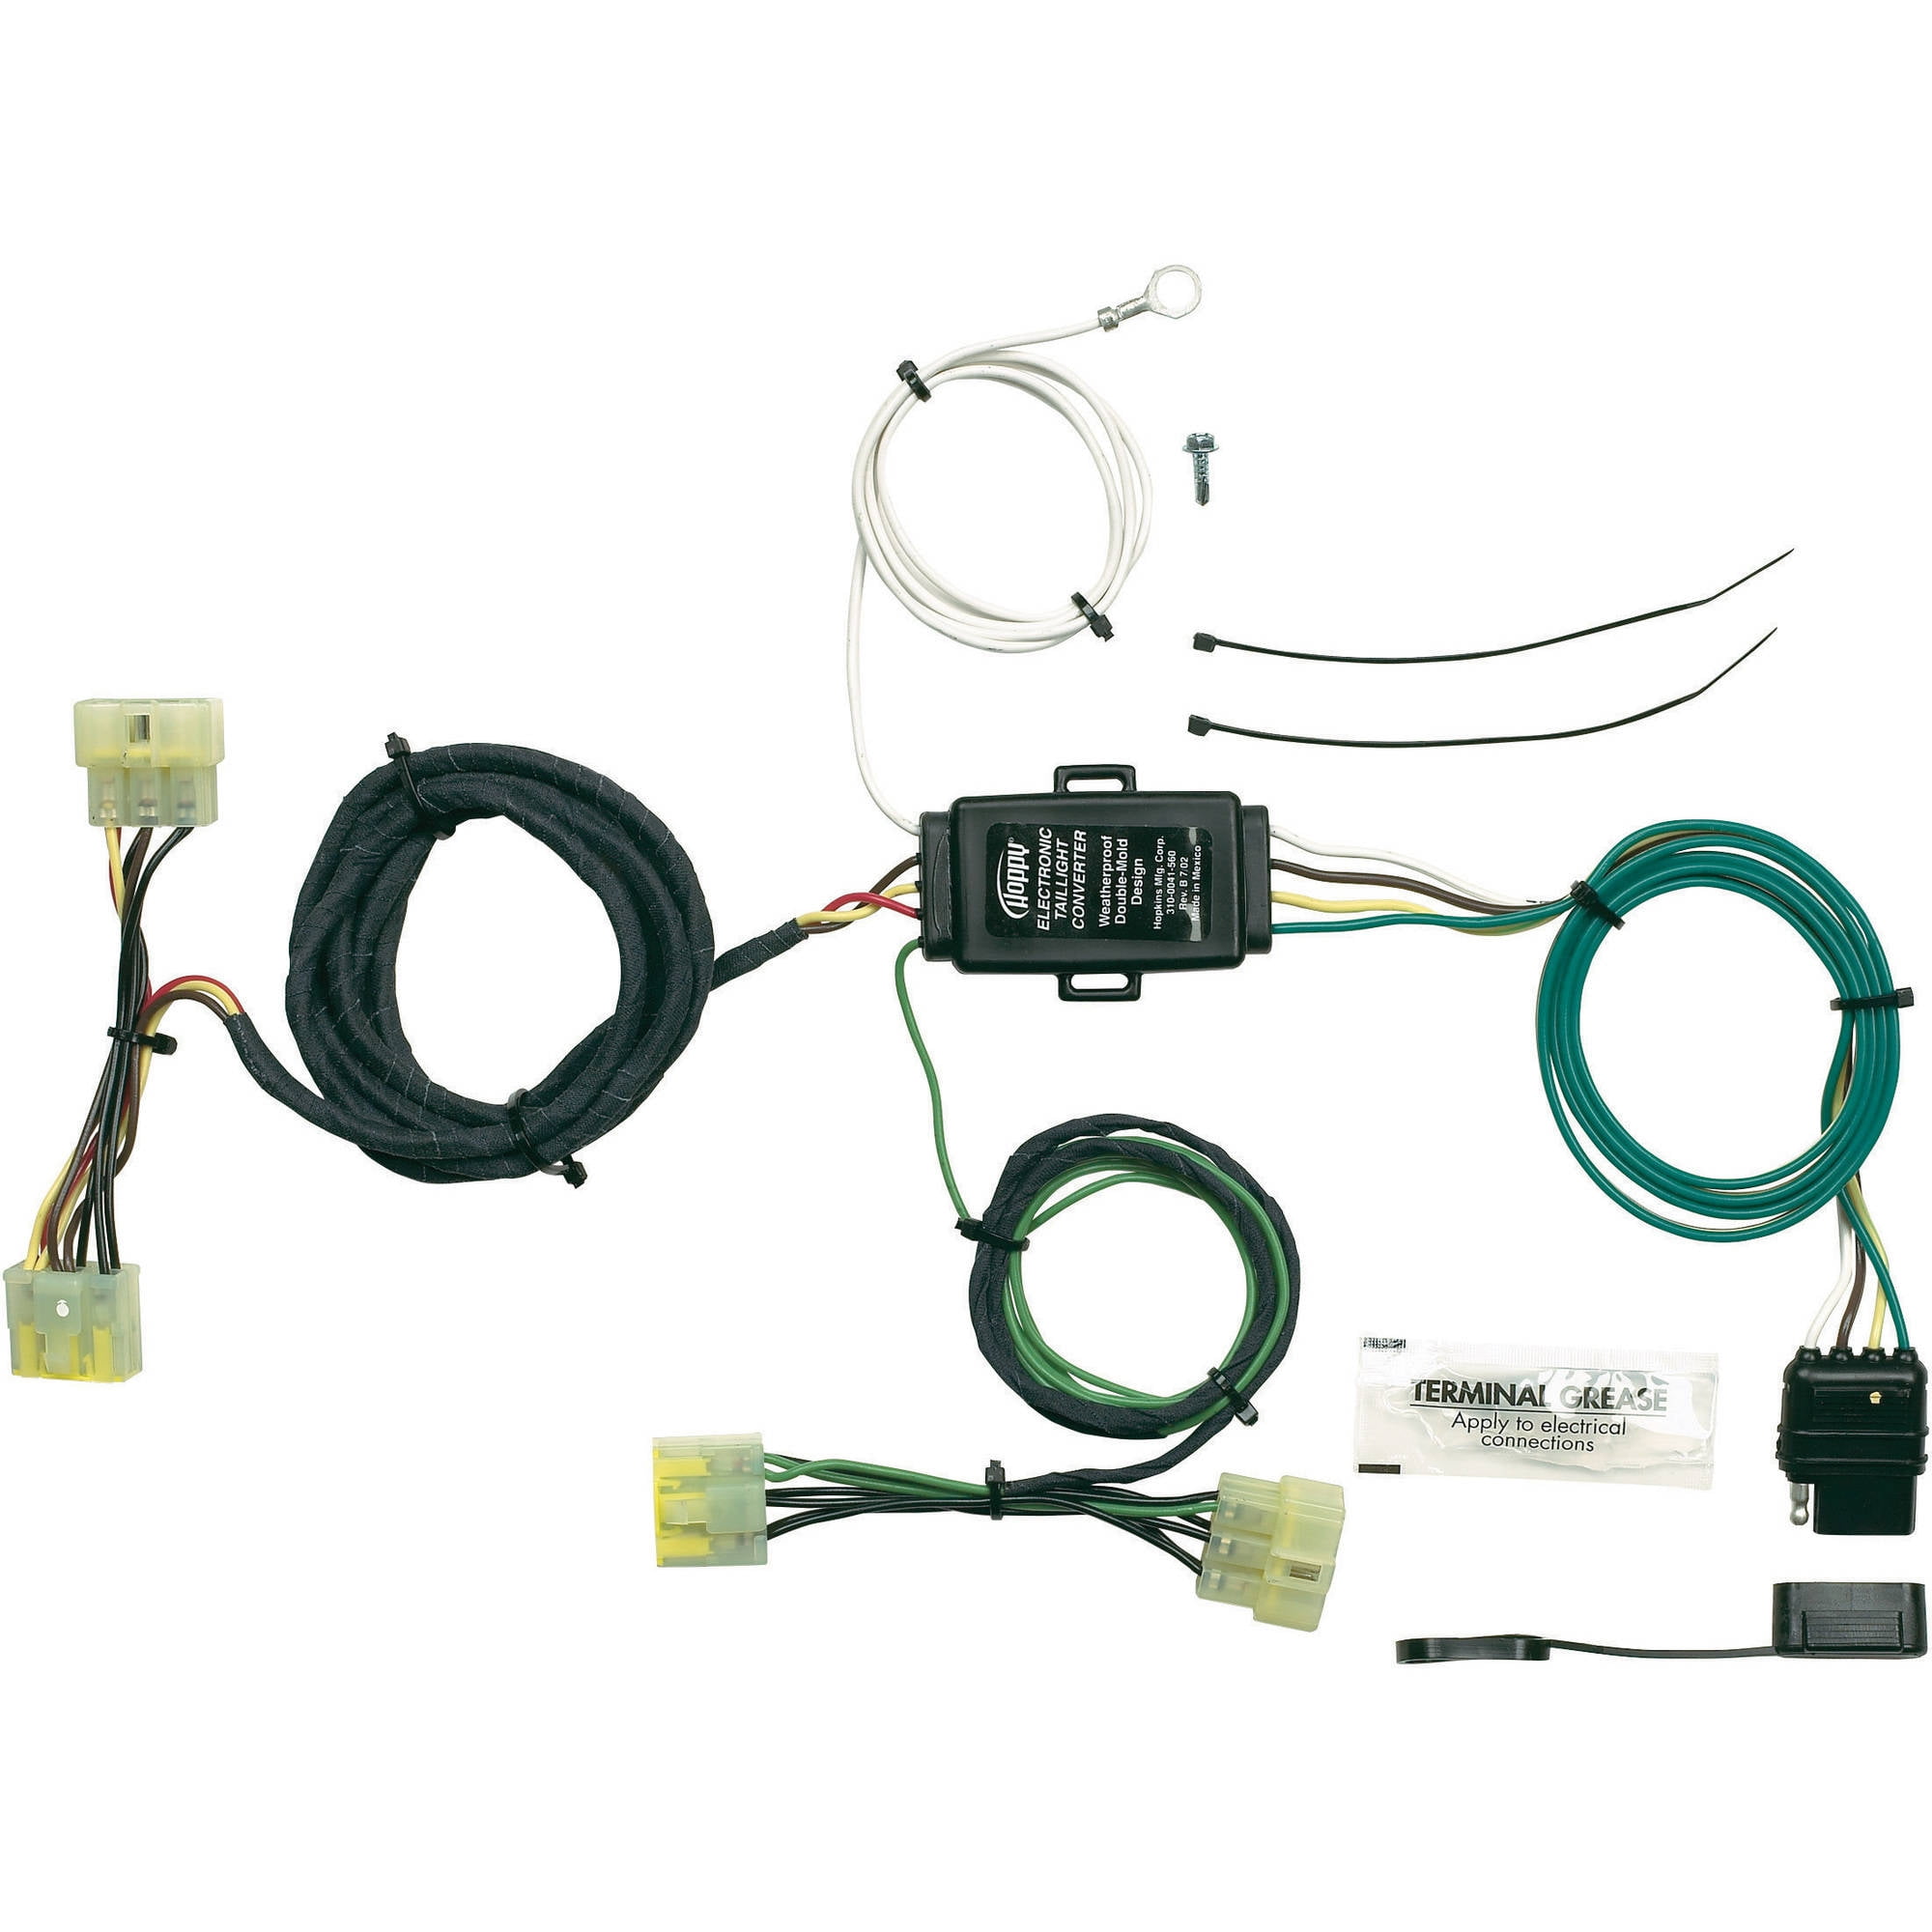 Toyota Trailer Wiring Converter from i5.walmartimages.com